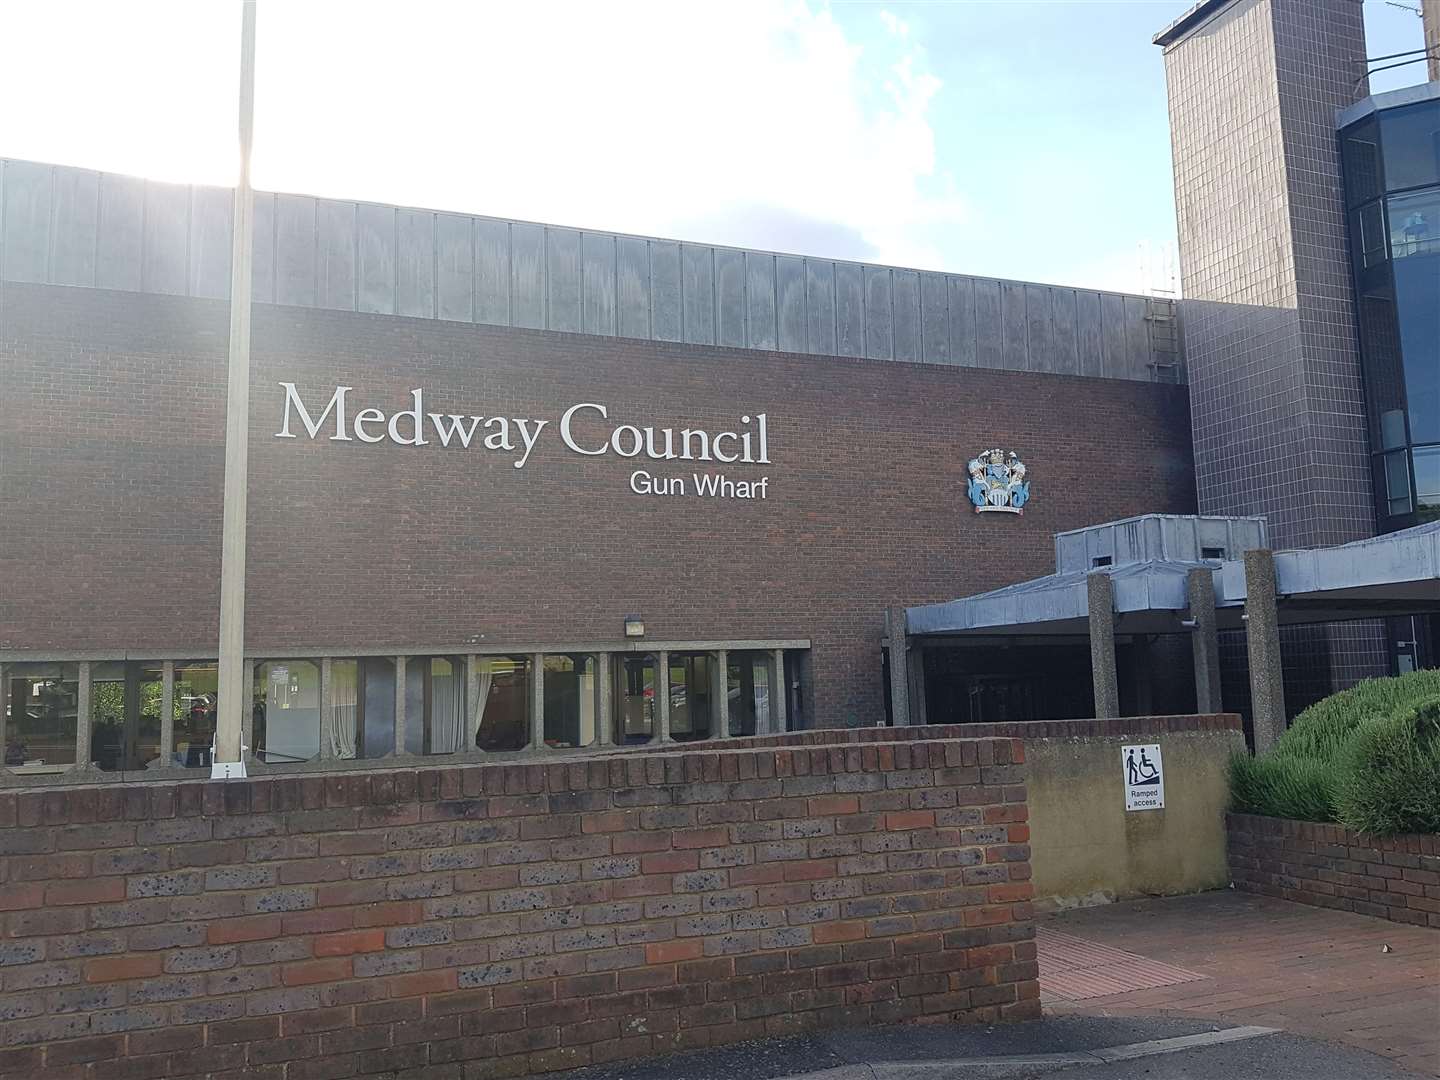 Gun Wharf is the home of Medway Council (6592566)